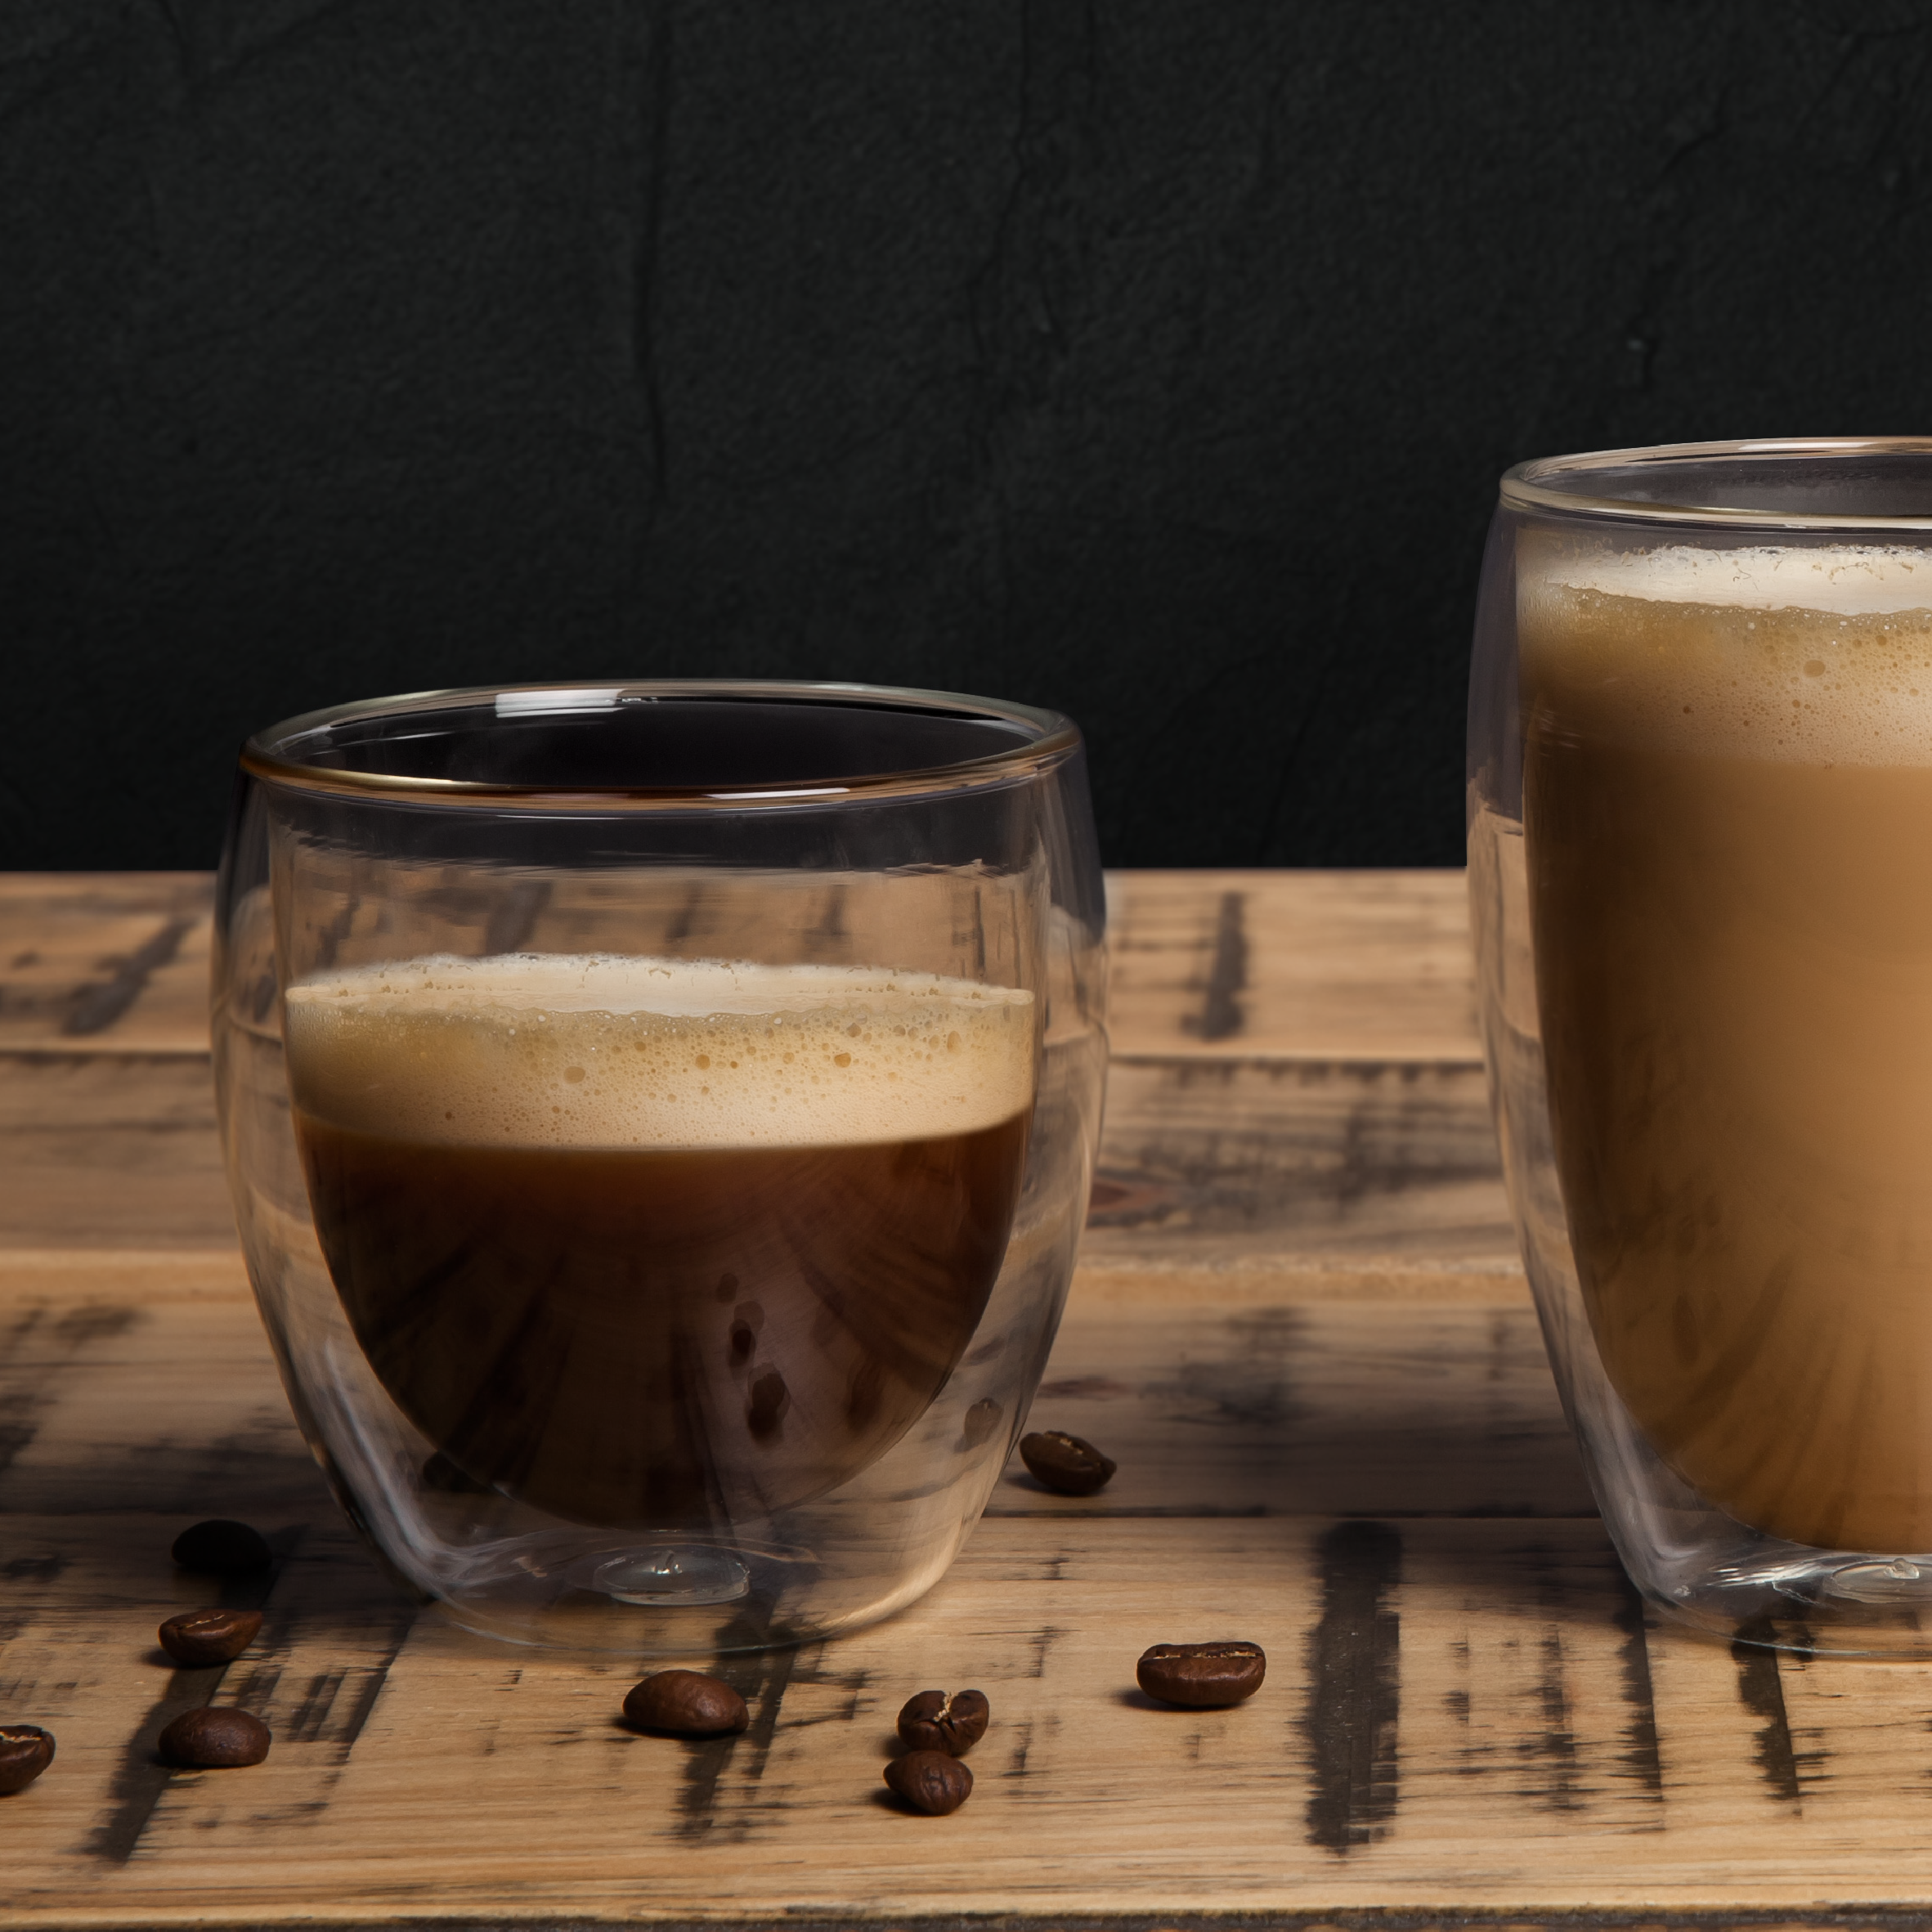 Double Walled Cappuccino Glass - Set of 2